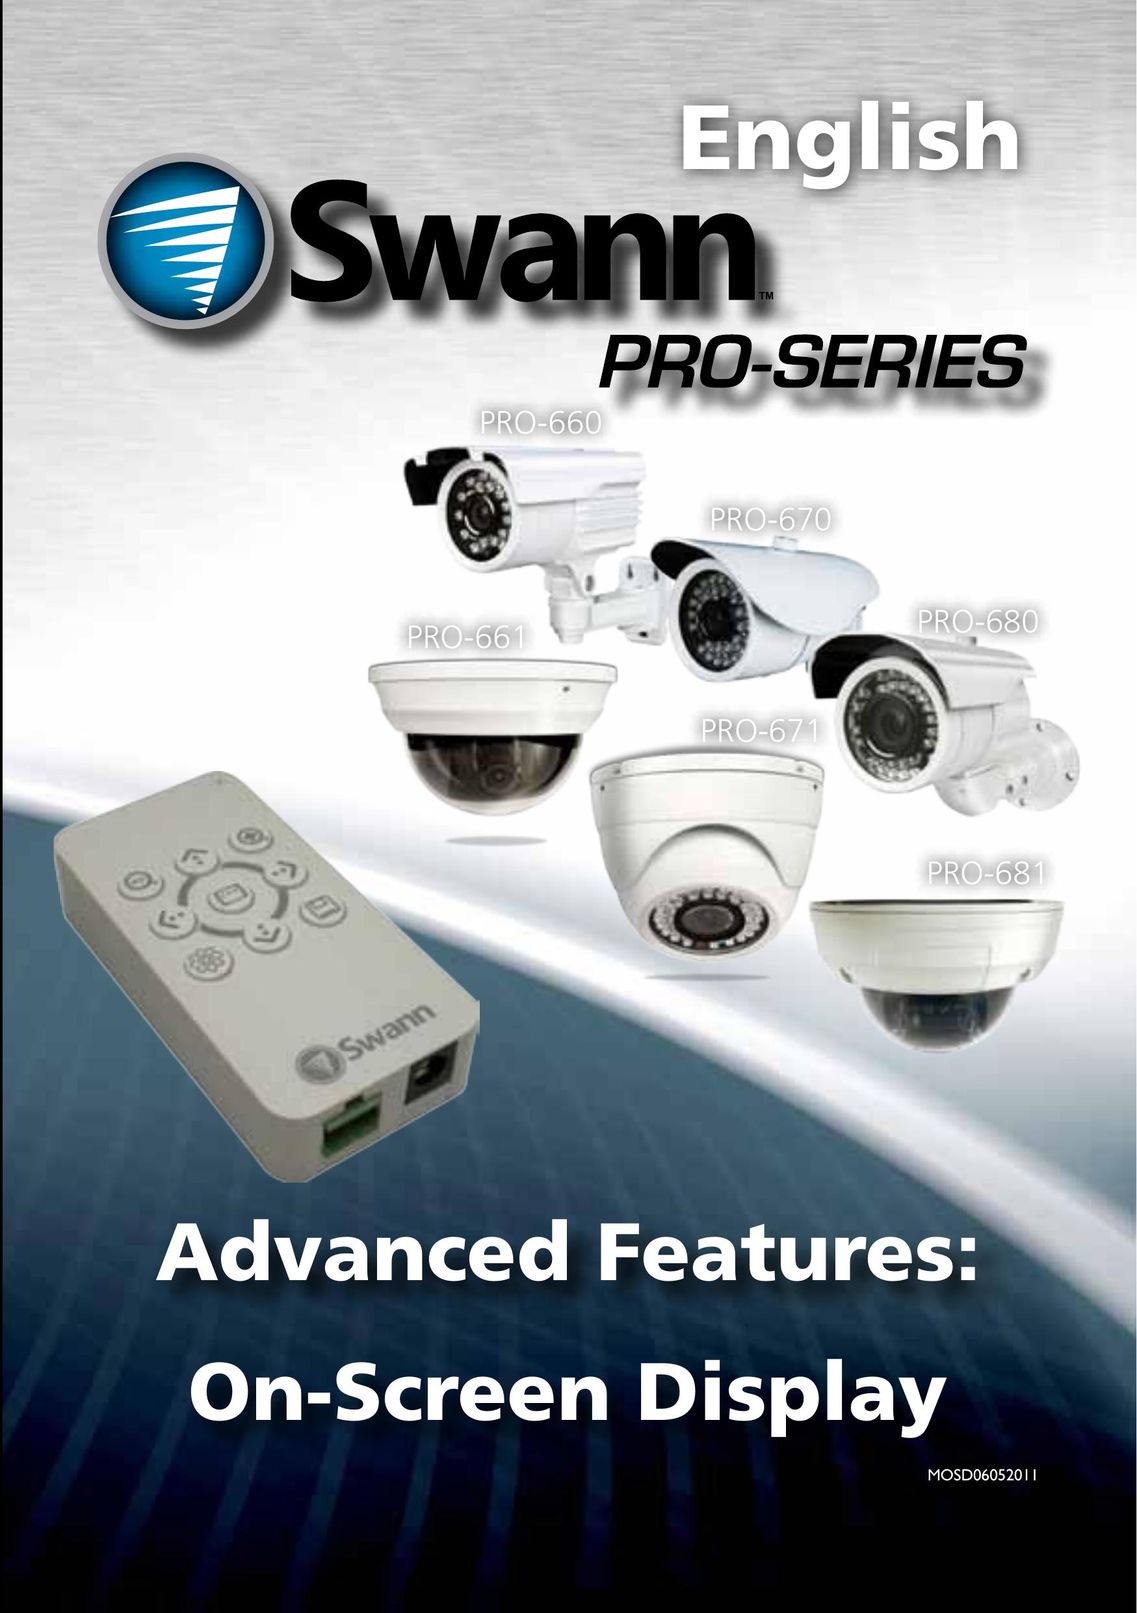 Swann PRO-680 Home Security System User Manual